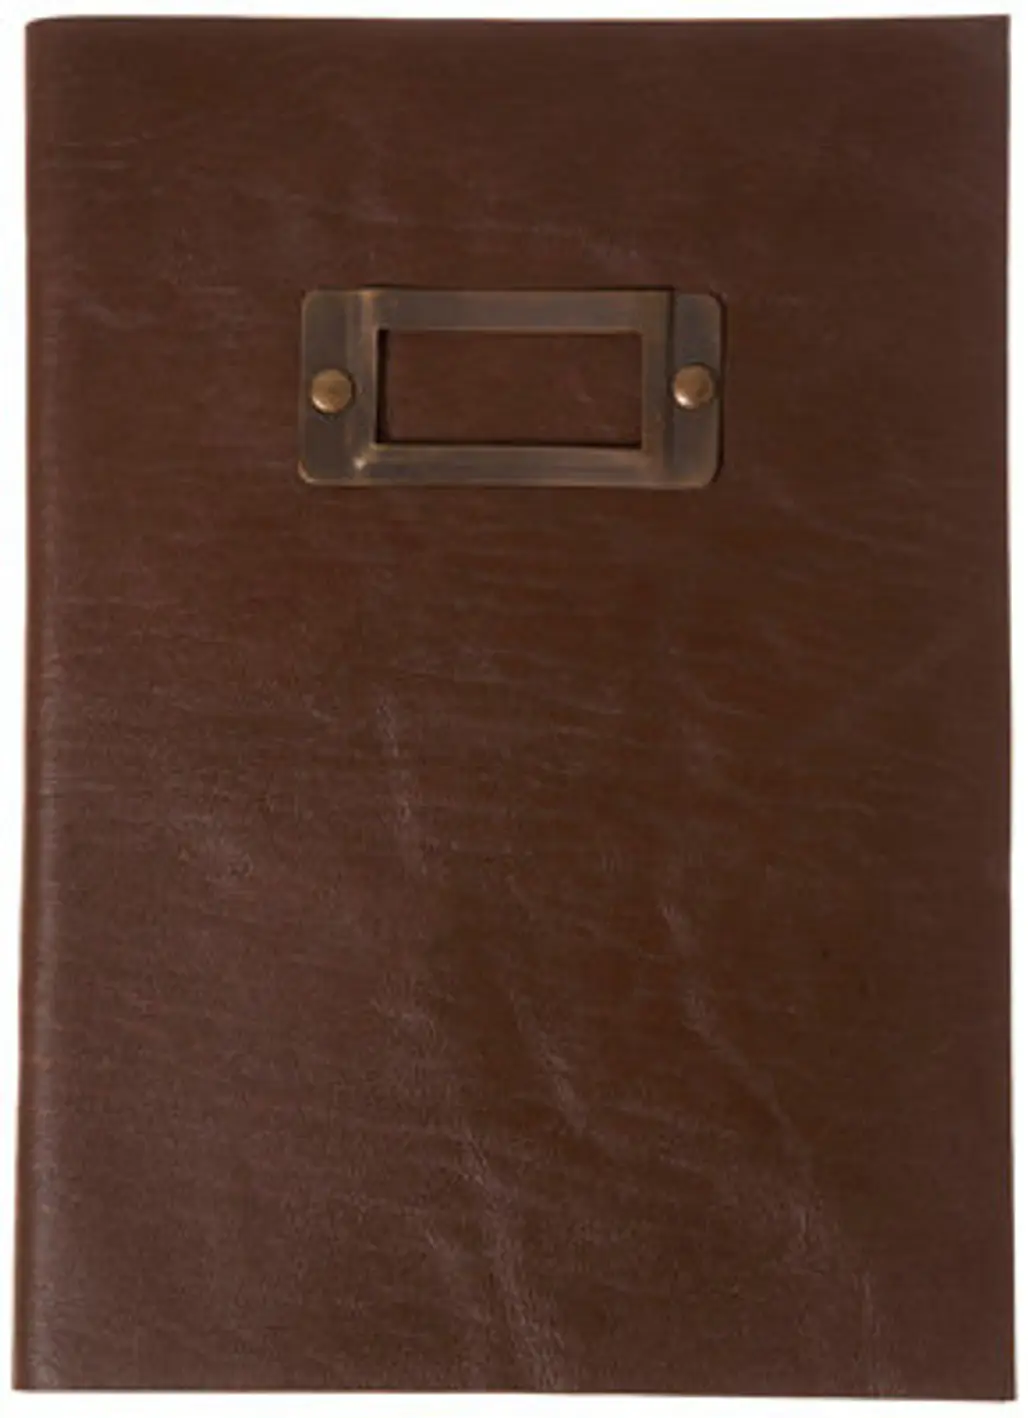 Topshop A5 Brown Leather Notebook